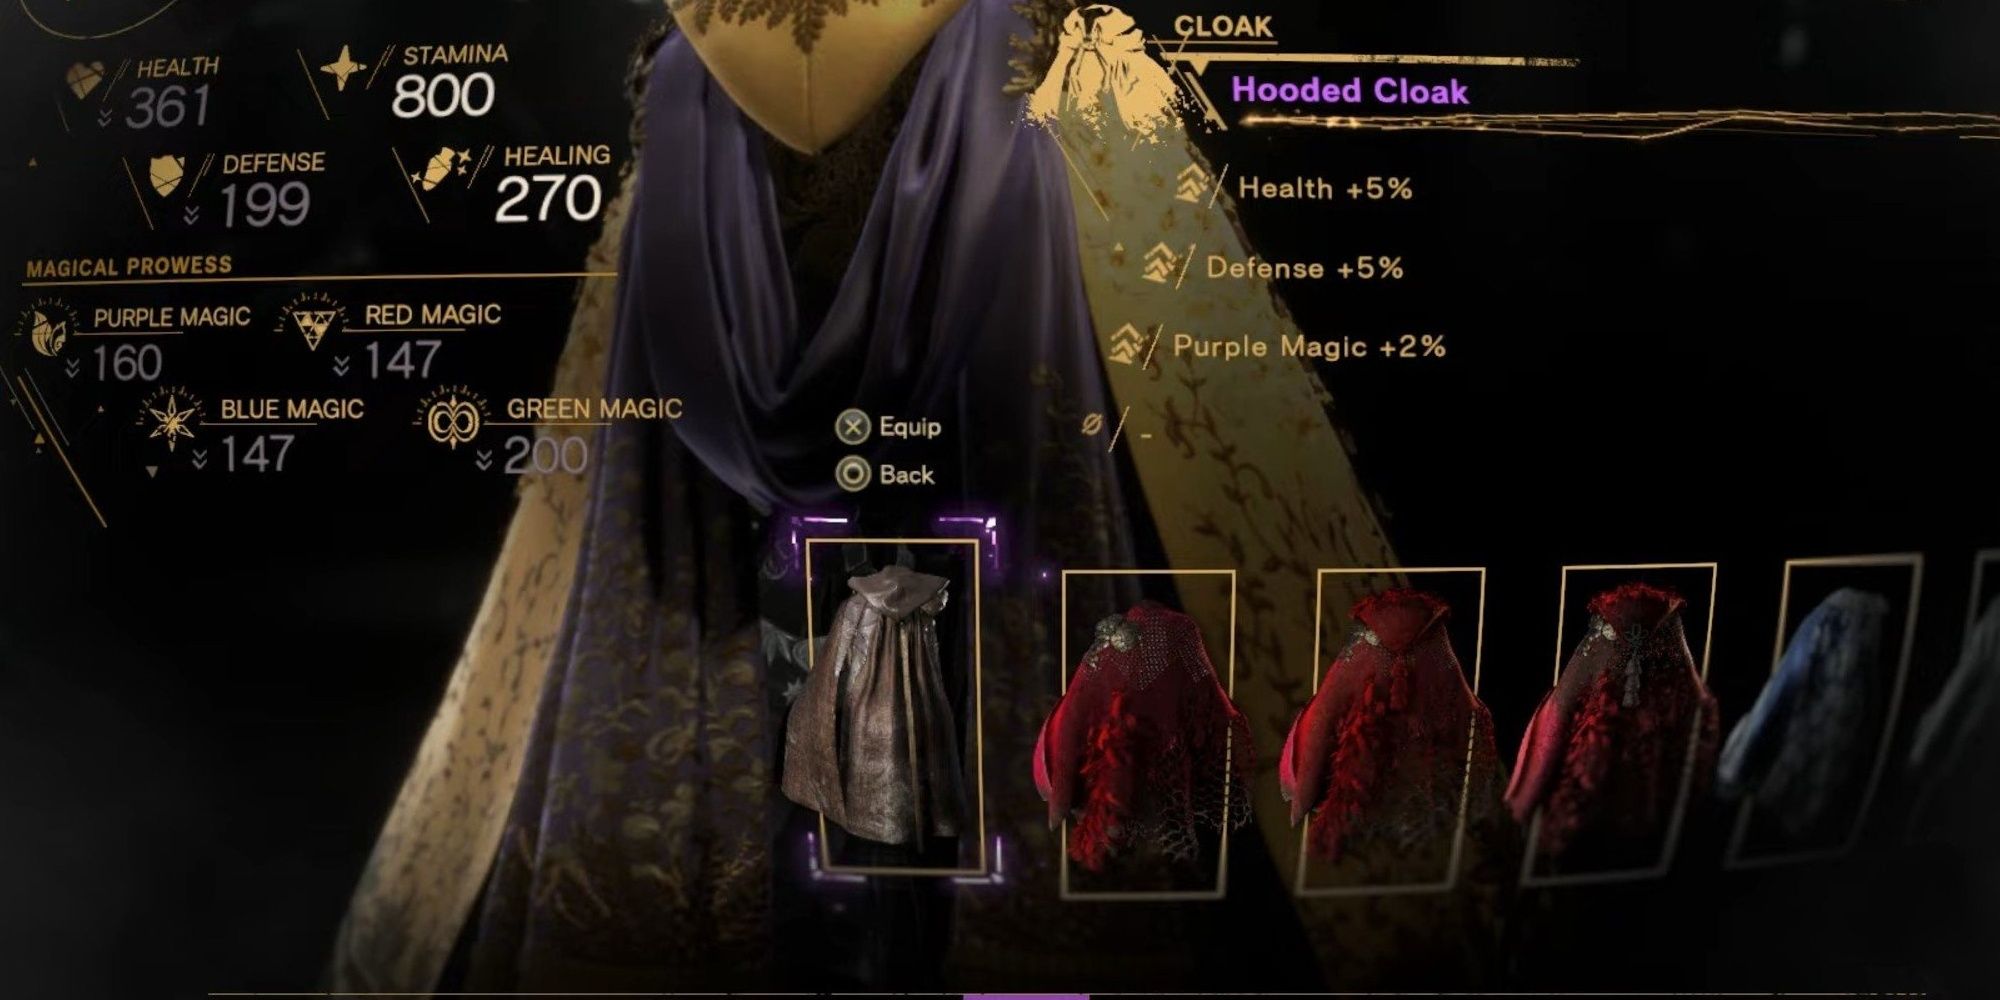 The Cloaks menu is being showcased by the character in Forspoken, with the hooded cloak selected and showcasing the character's stats.